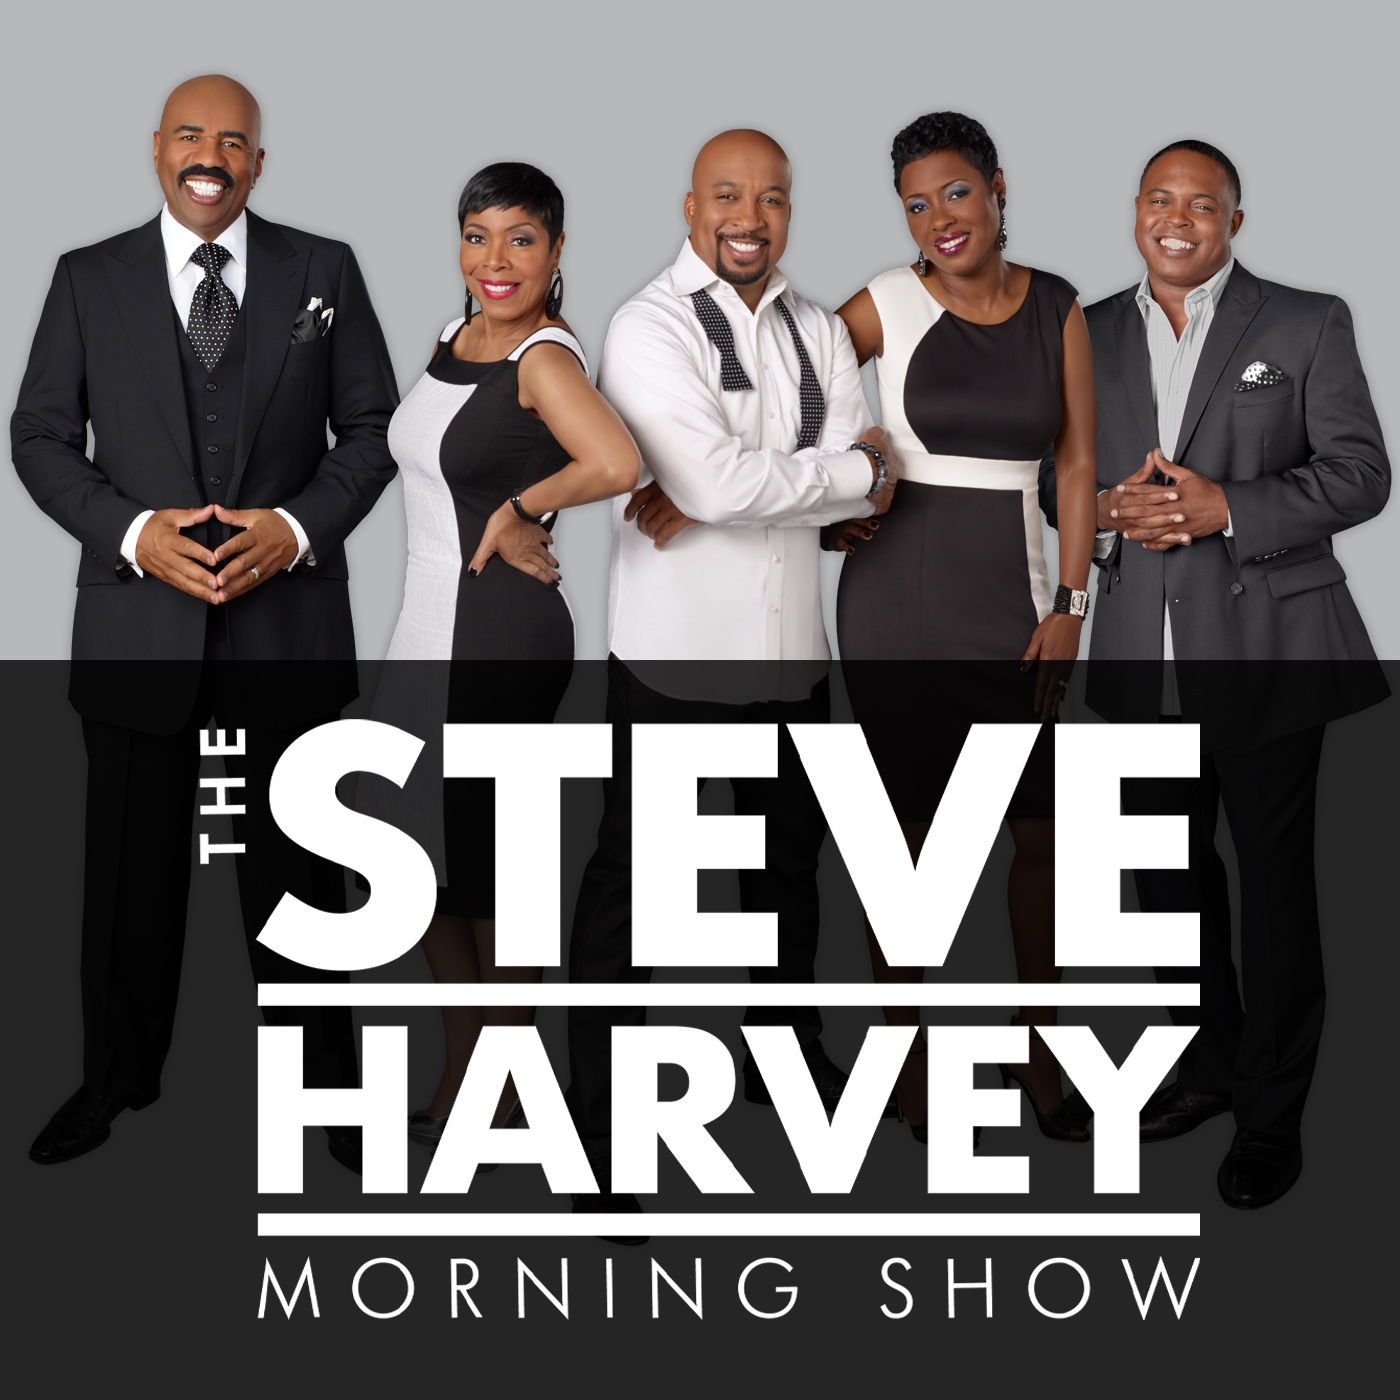 Democratic Party Leader, People's Choice Awards, Workout Playlist, steveharveyfm.com and more.